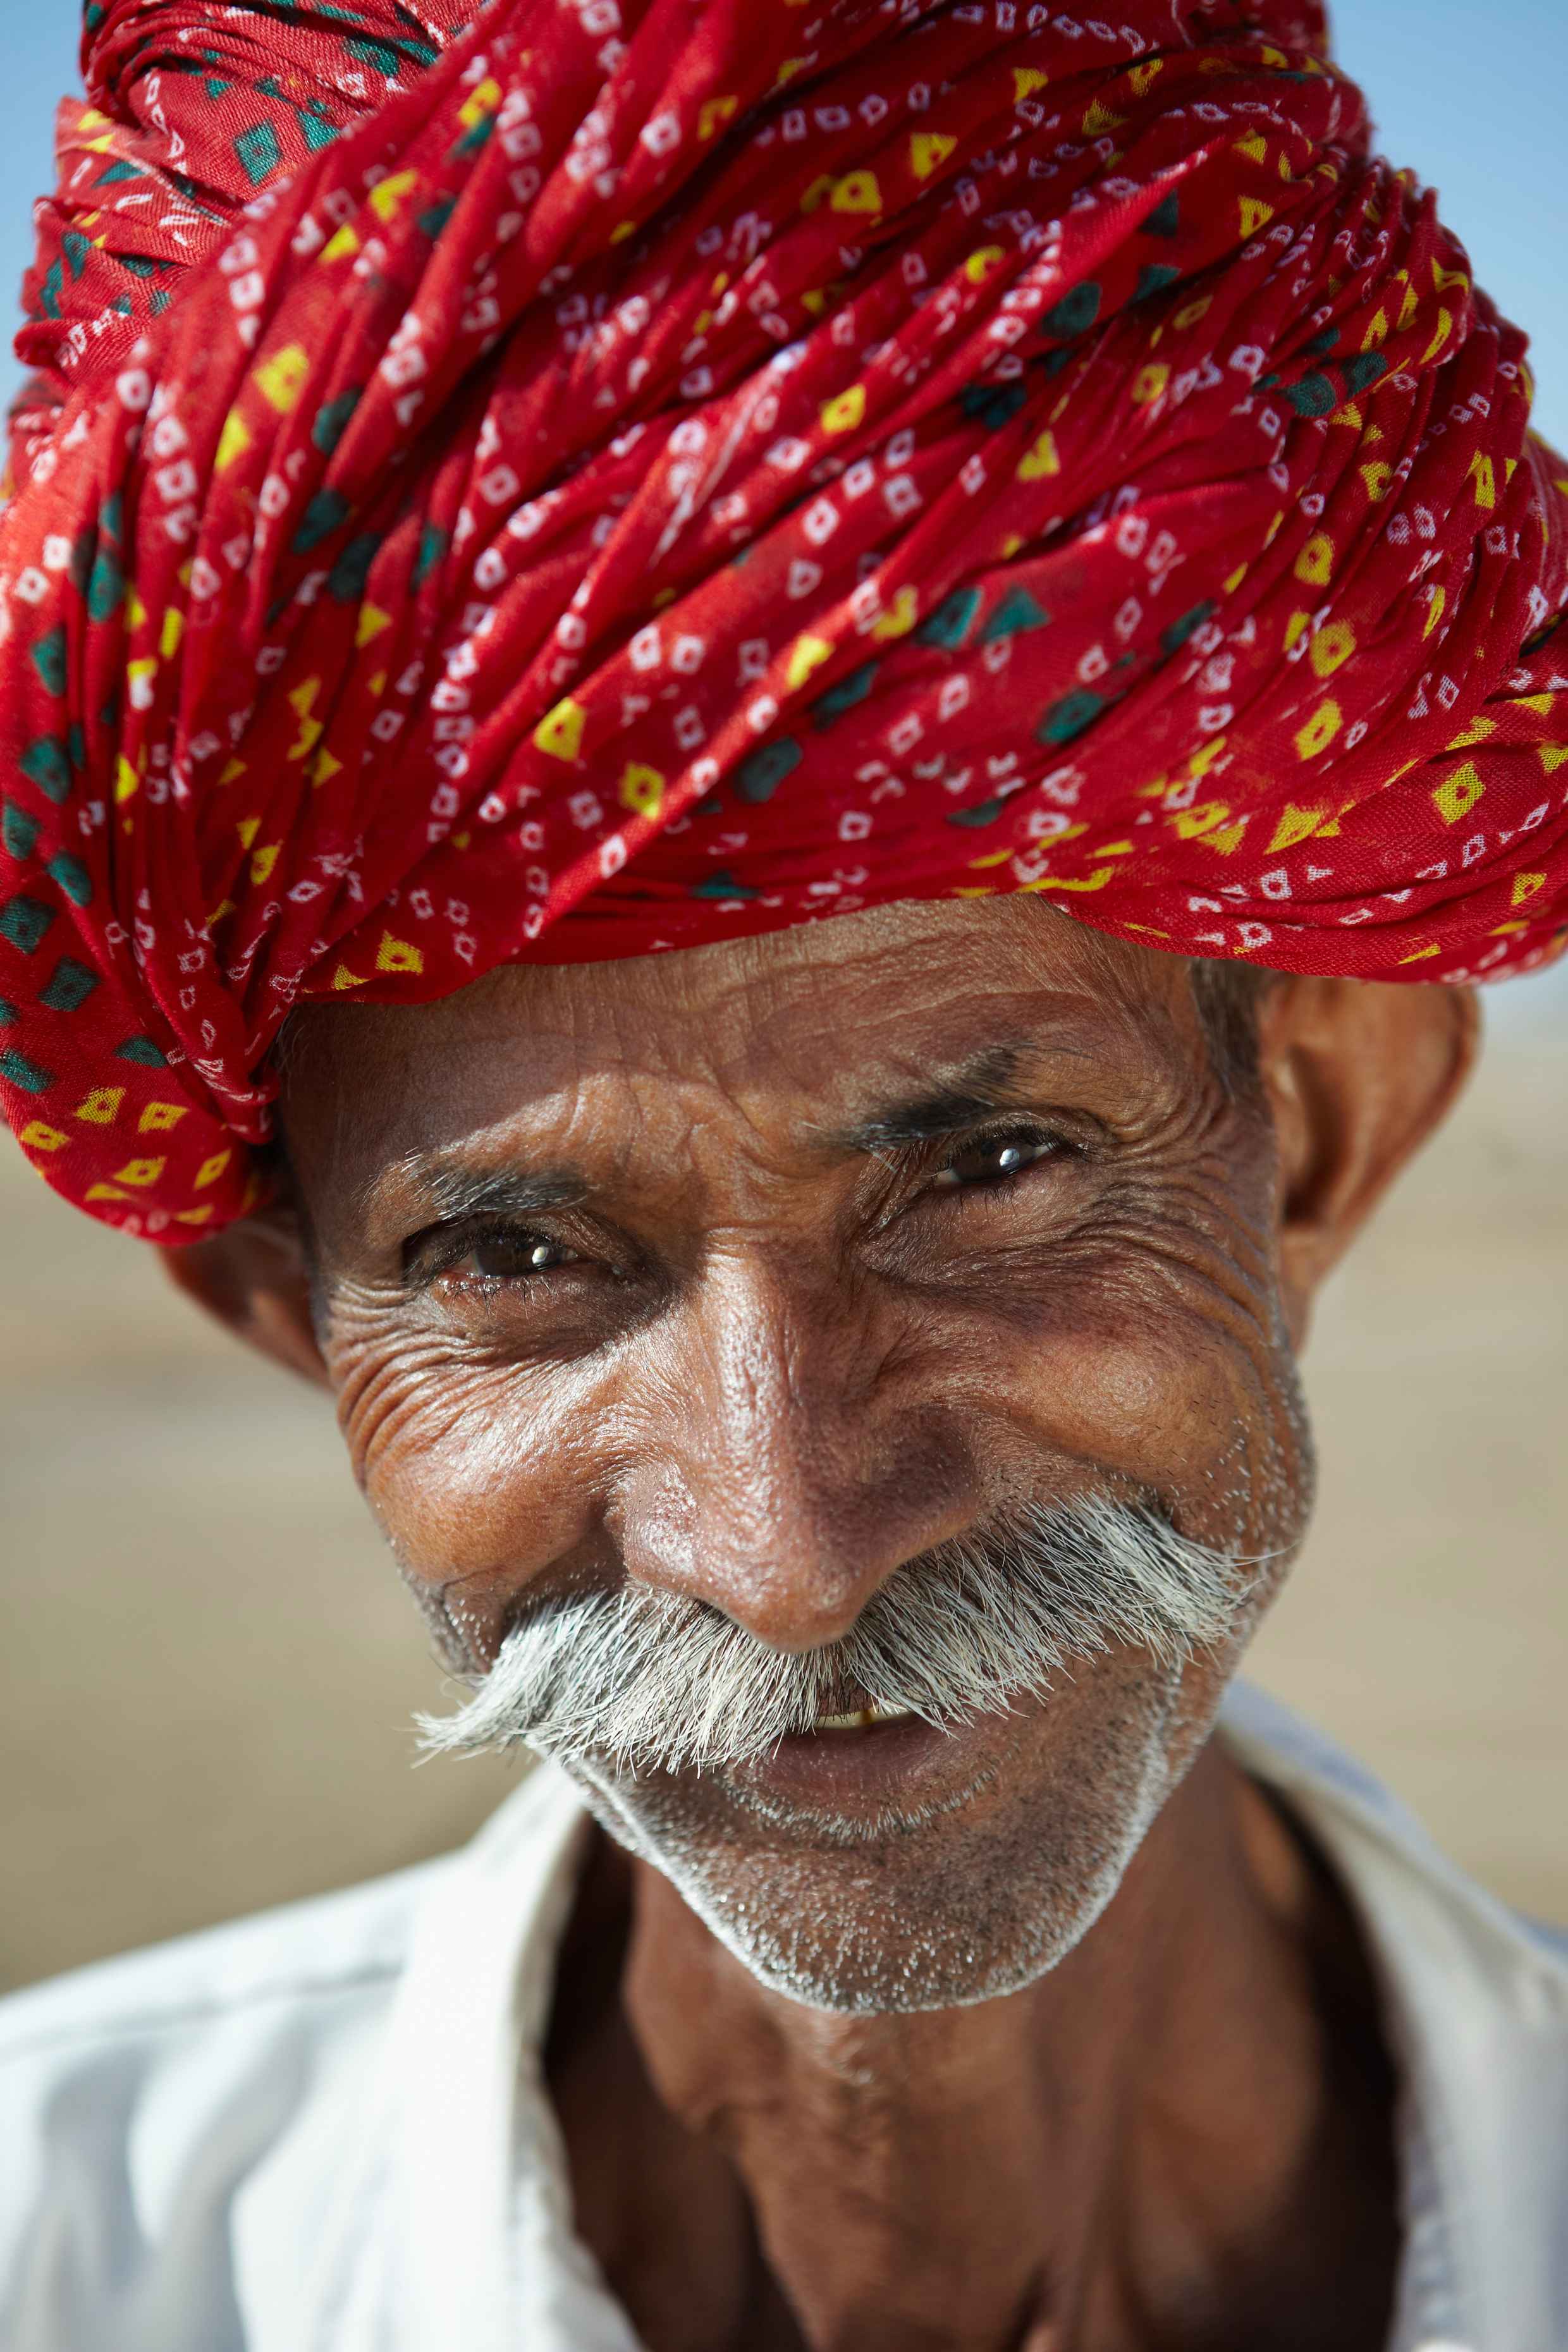 Homme portant le turban traditionnel Rajasthani.